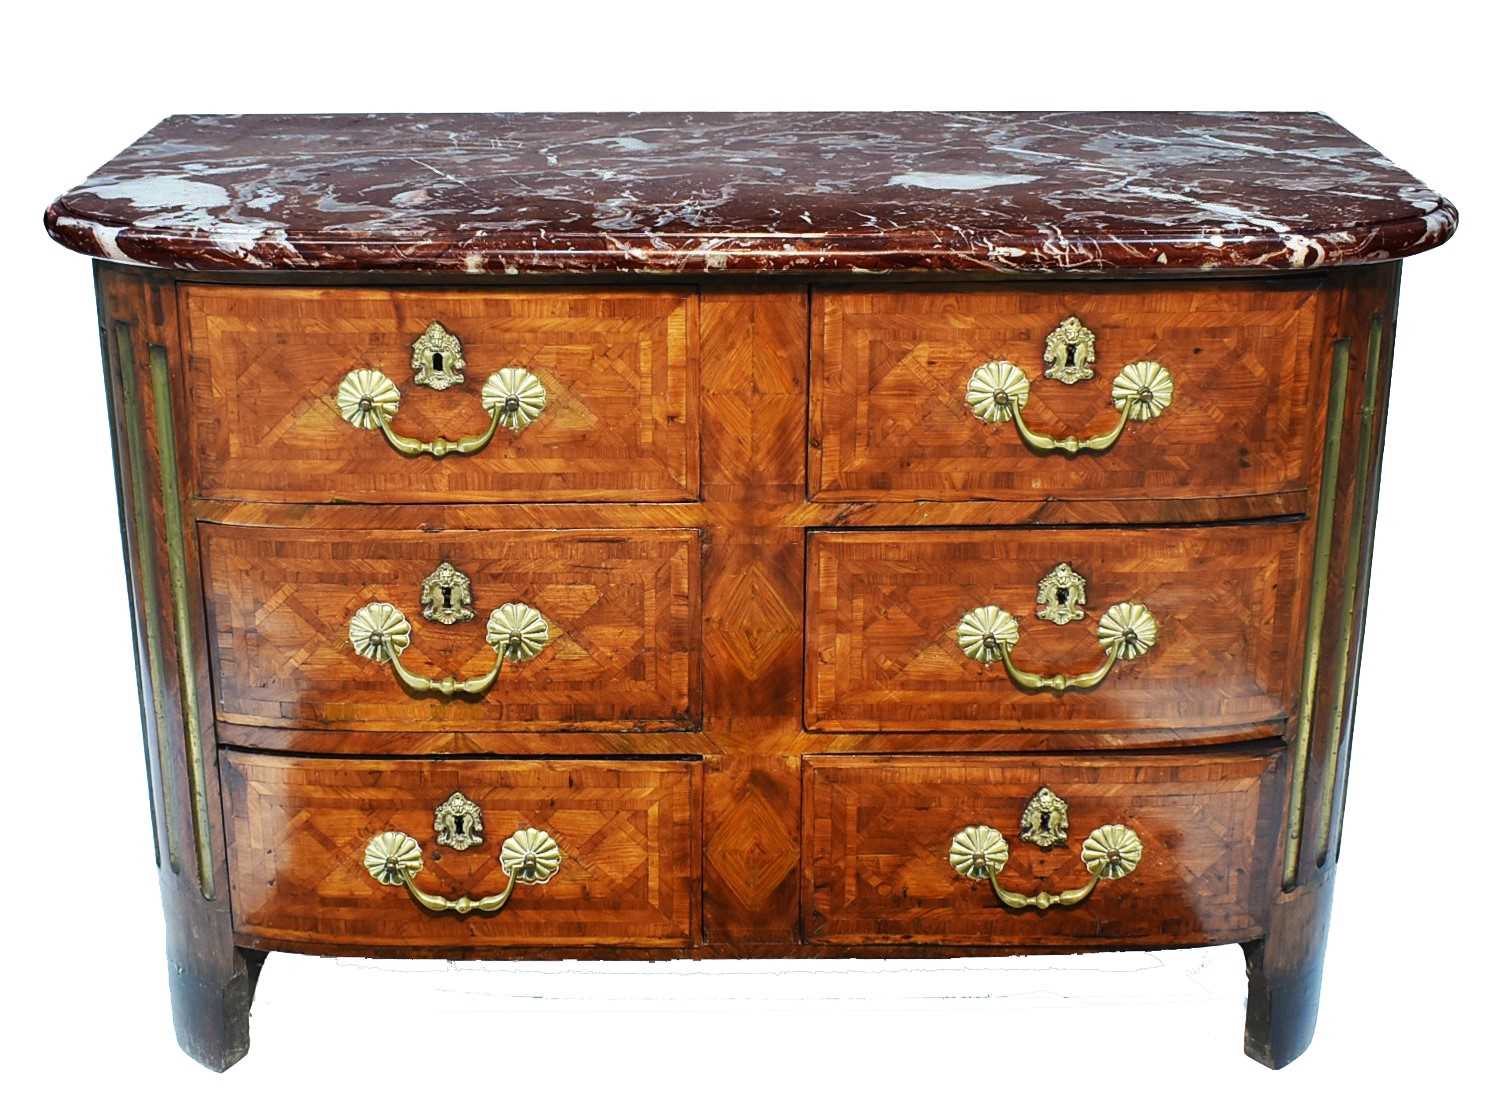 Lot 1104 - A French Regence kingwood and parquetry commode.